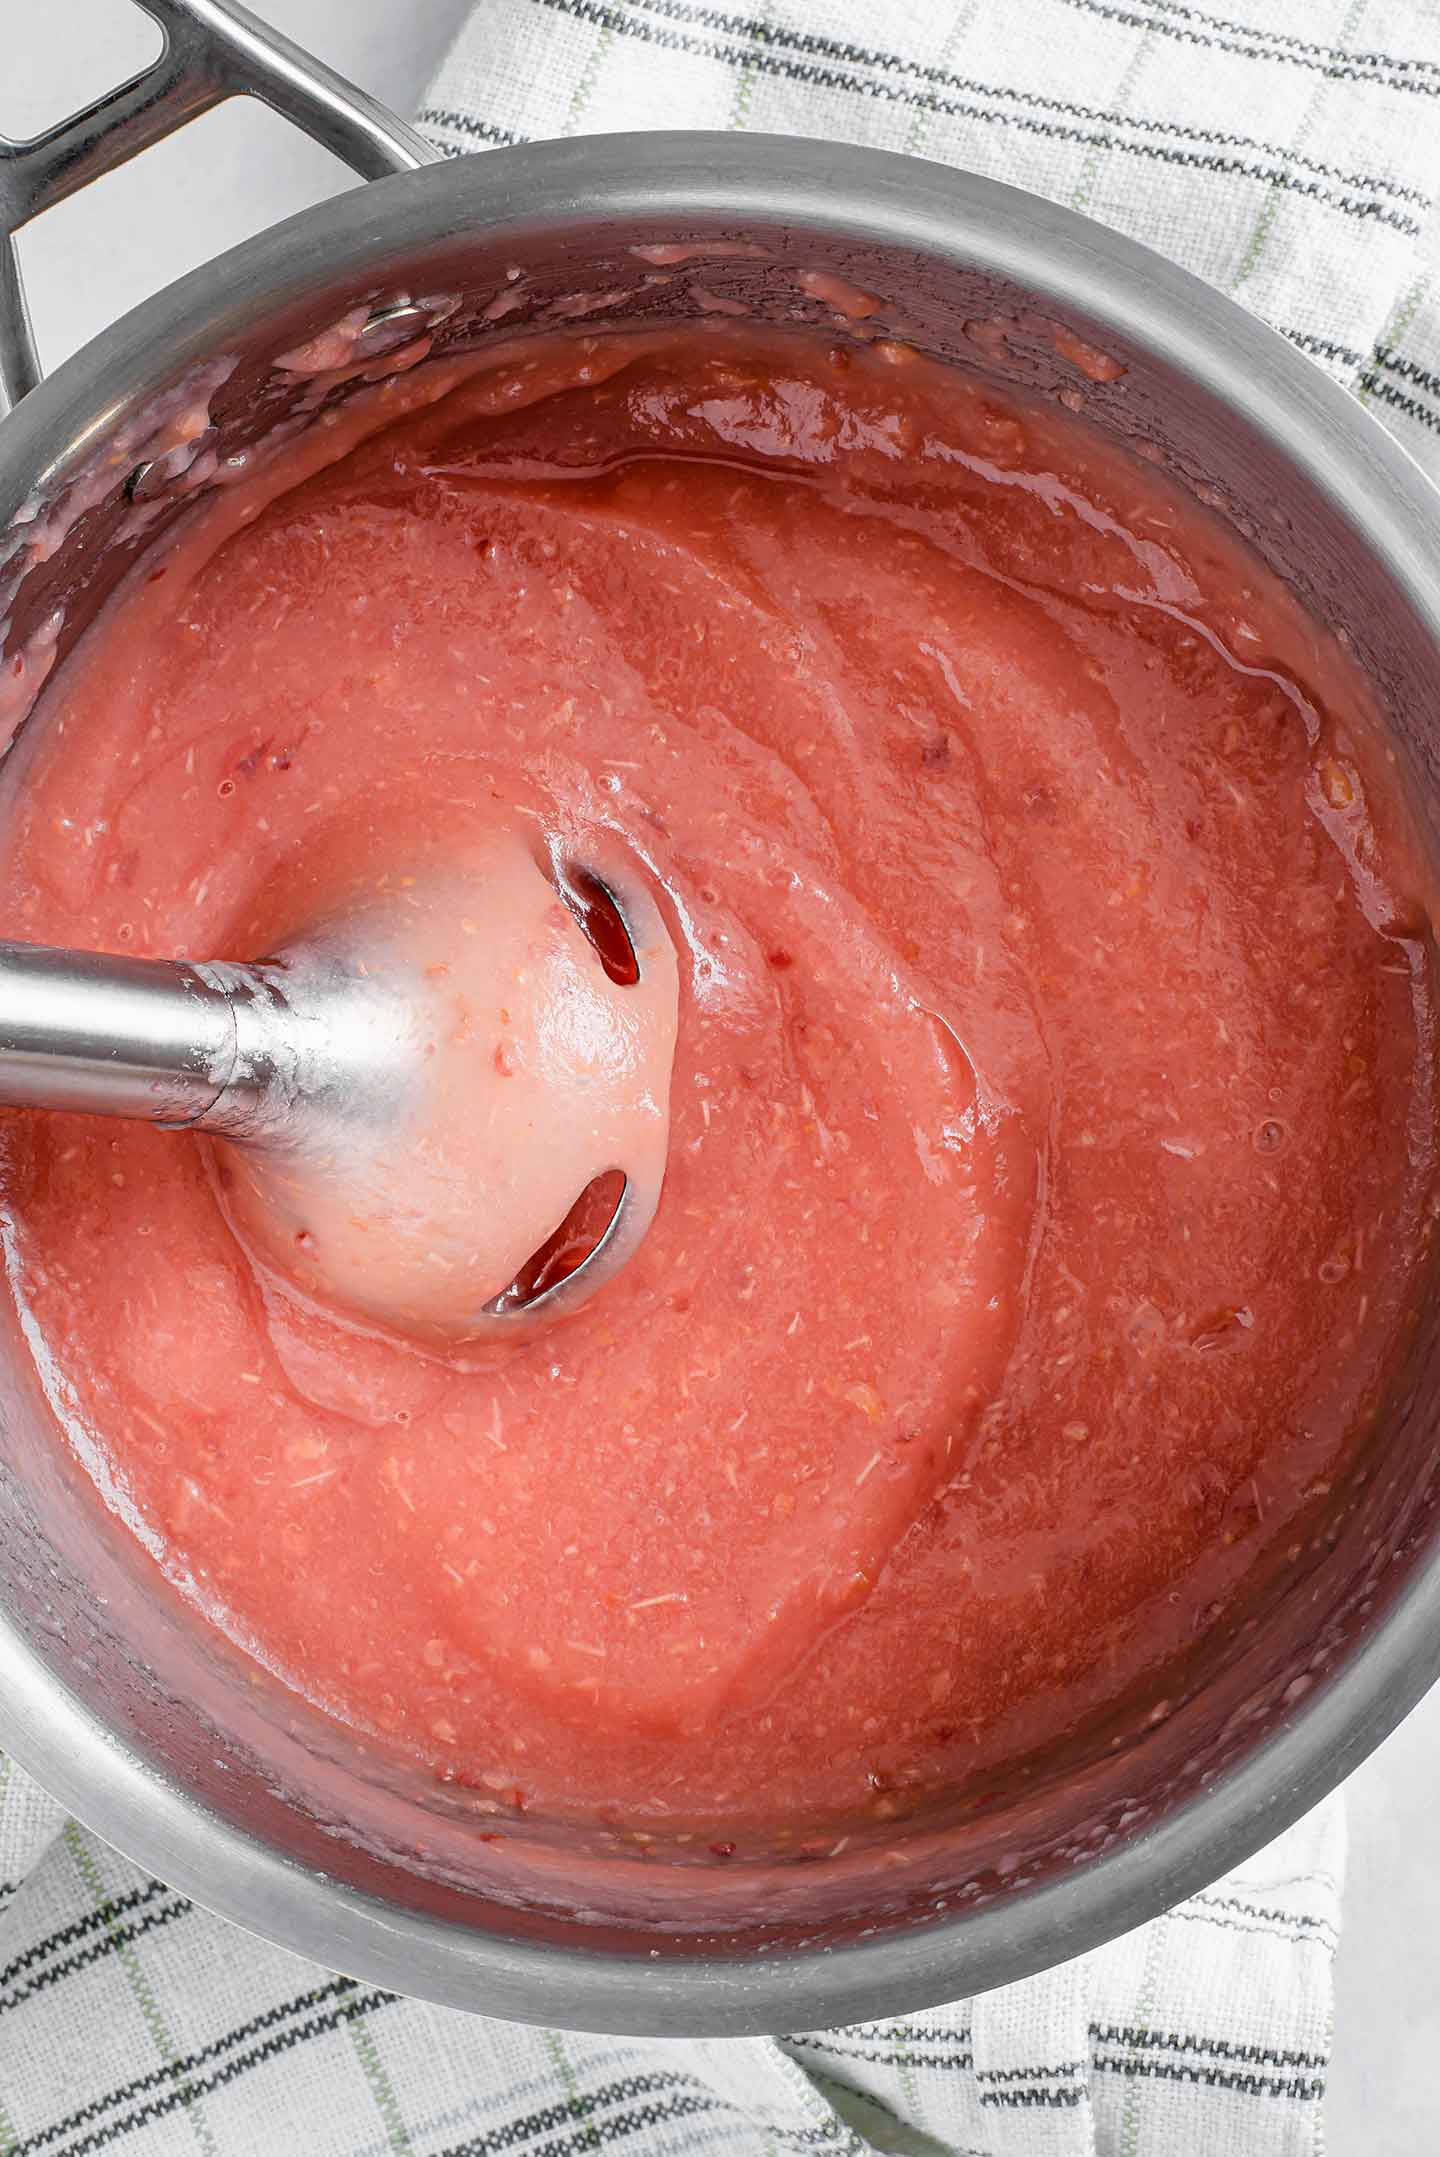 Top down view of pink applesauce being pureed with an immersion blender.